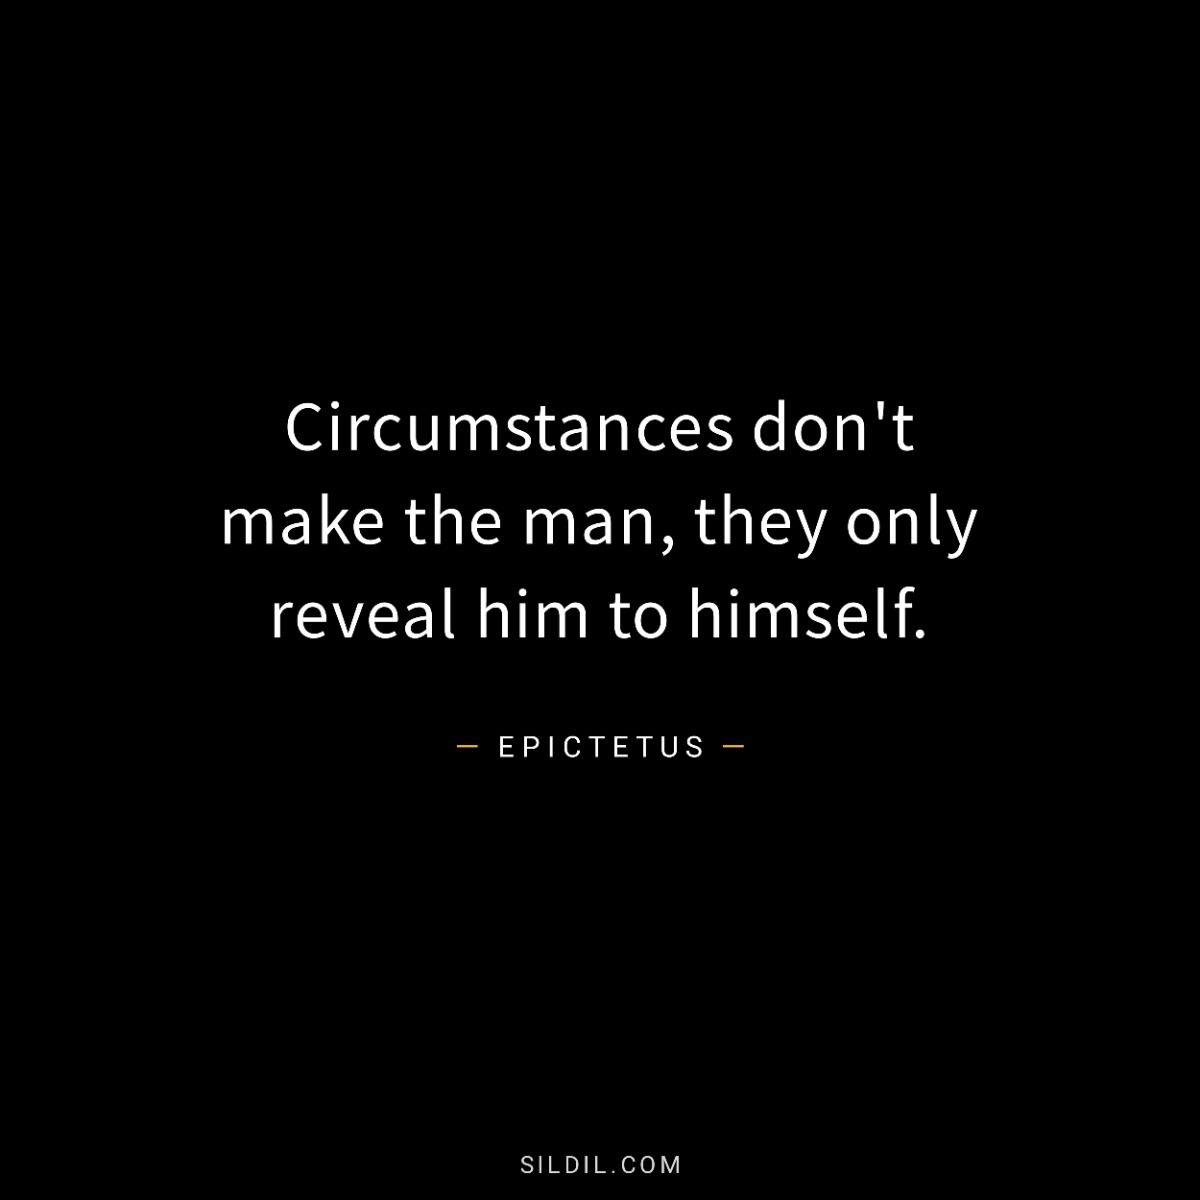 Circumstances don't make the man, they only reveal him to himself.